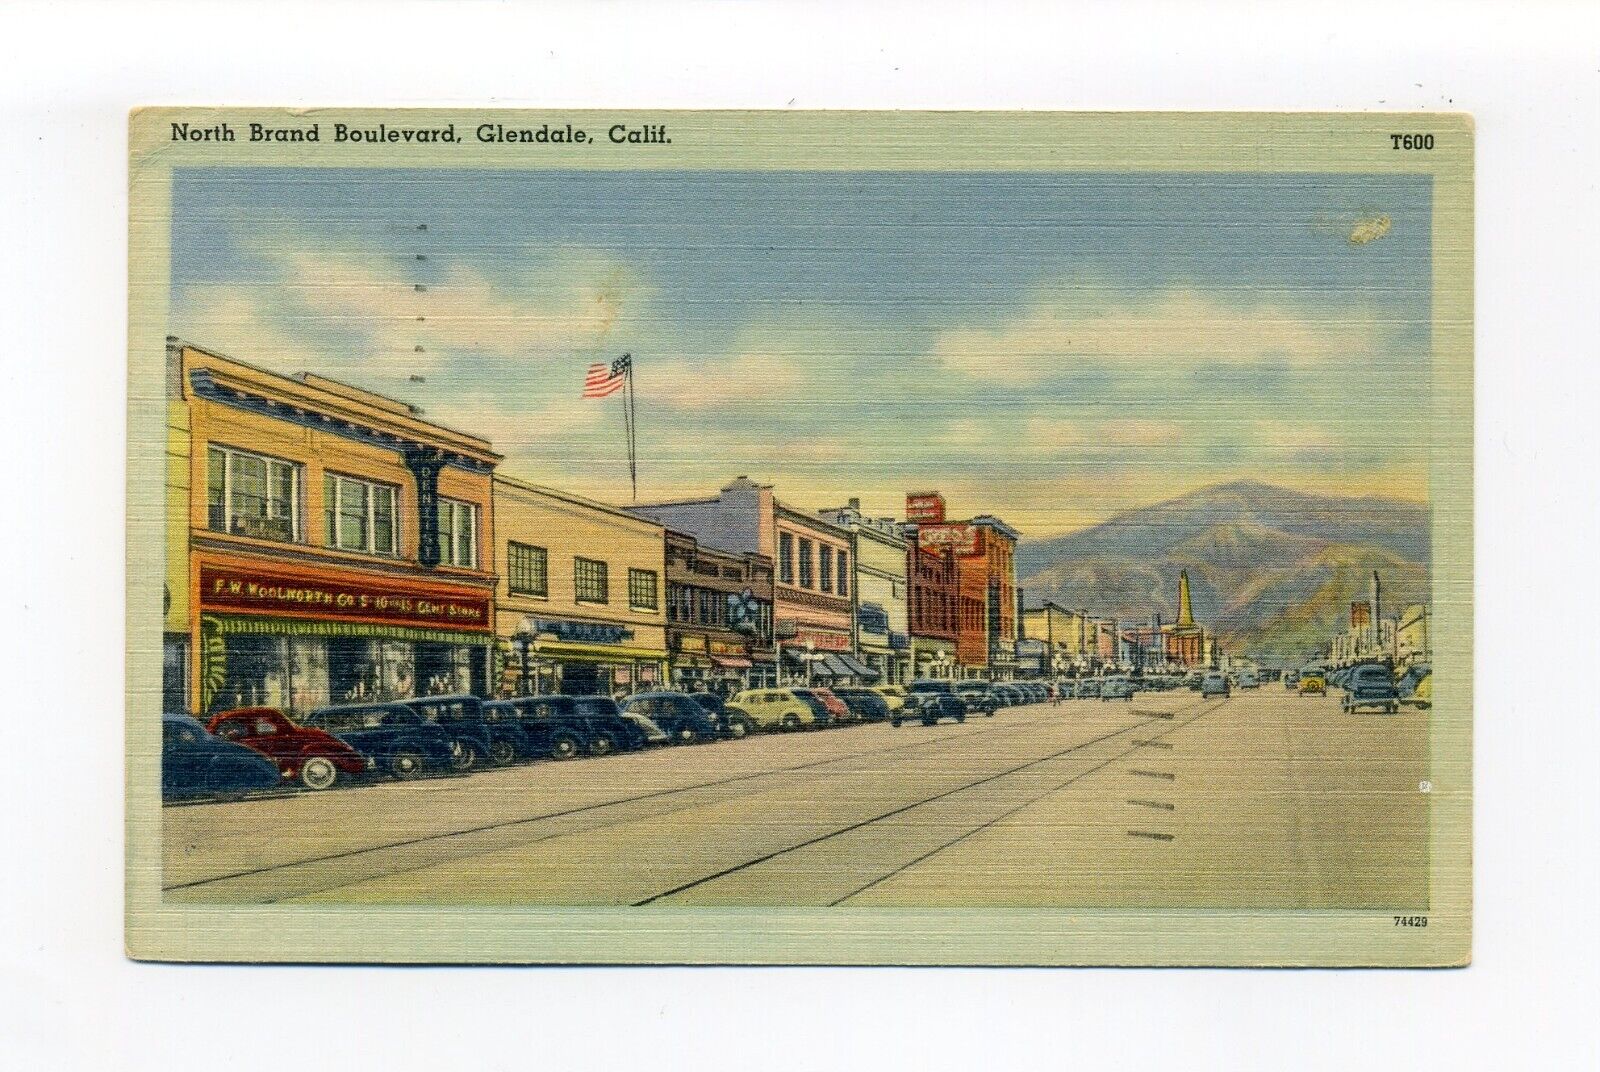 Glendale CA 1948 linen postcard, North Brand Blvd, cars, stores, Woolworth